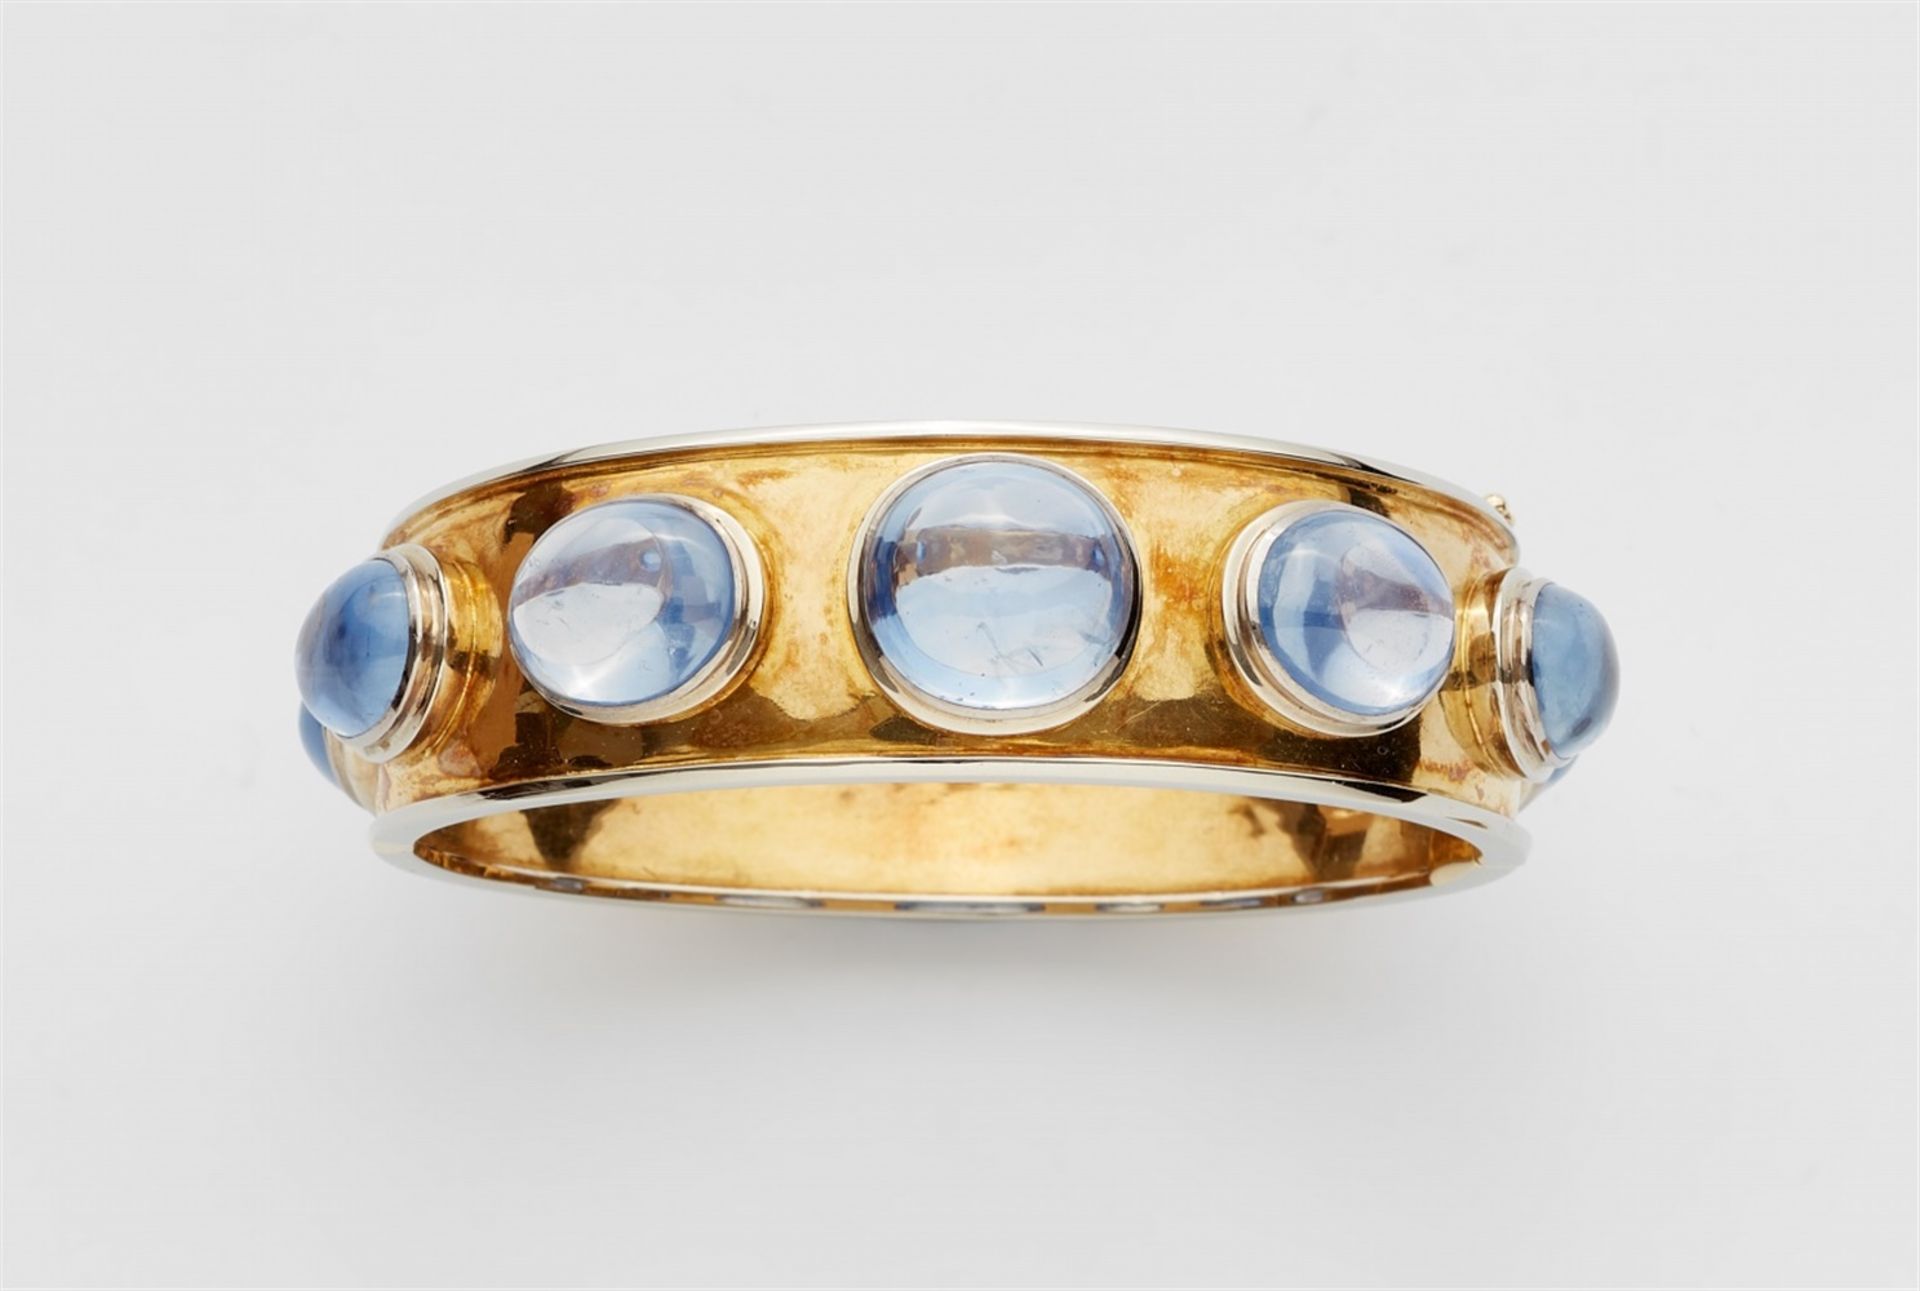 An 18k gold and Ceylon sapphire bracelet18 kt white and yellow gold Slightly convex bi-colour gold